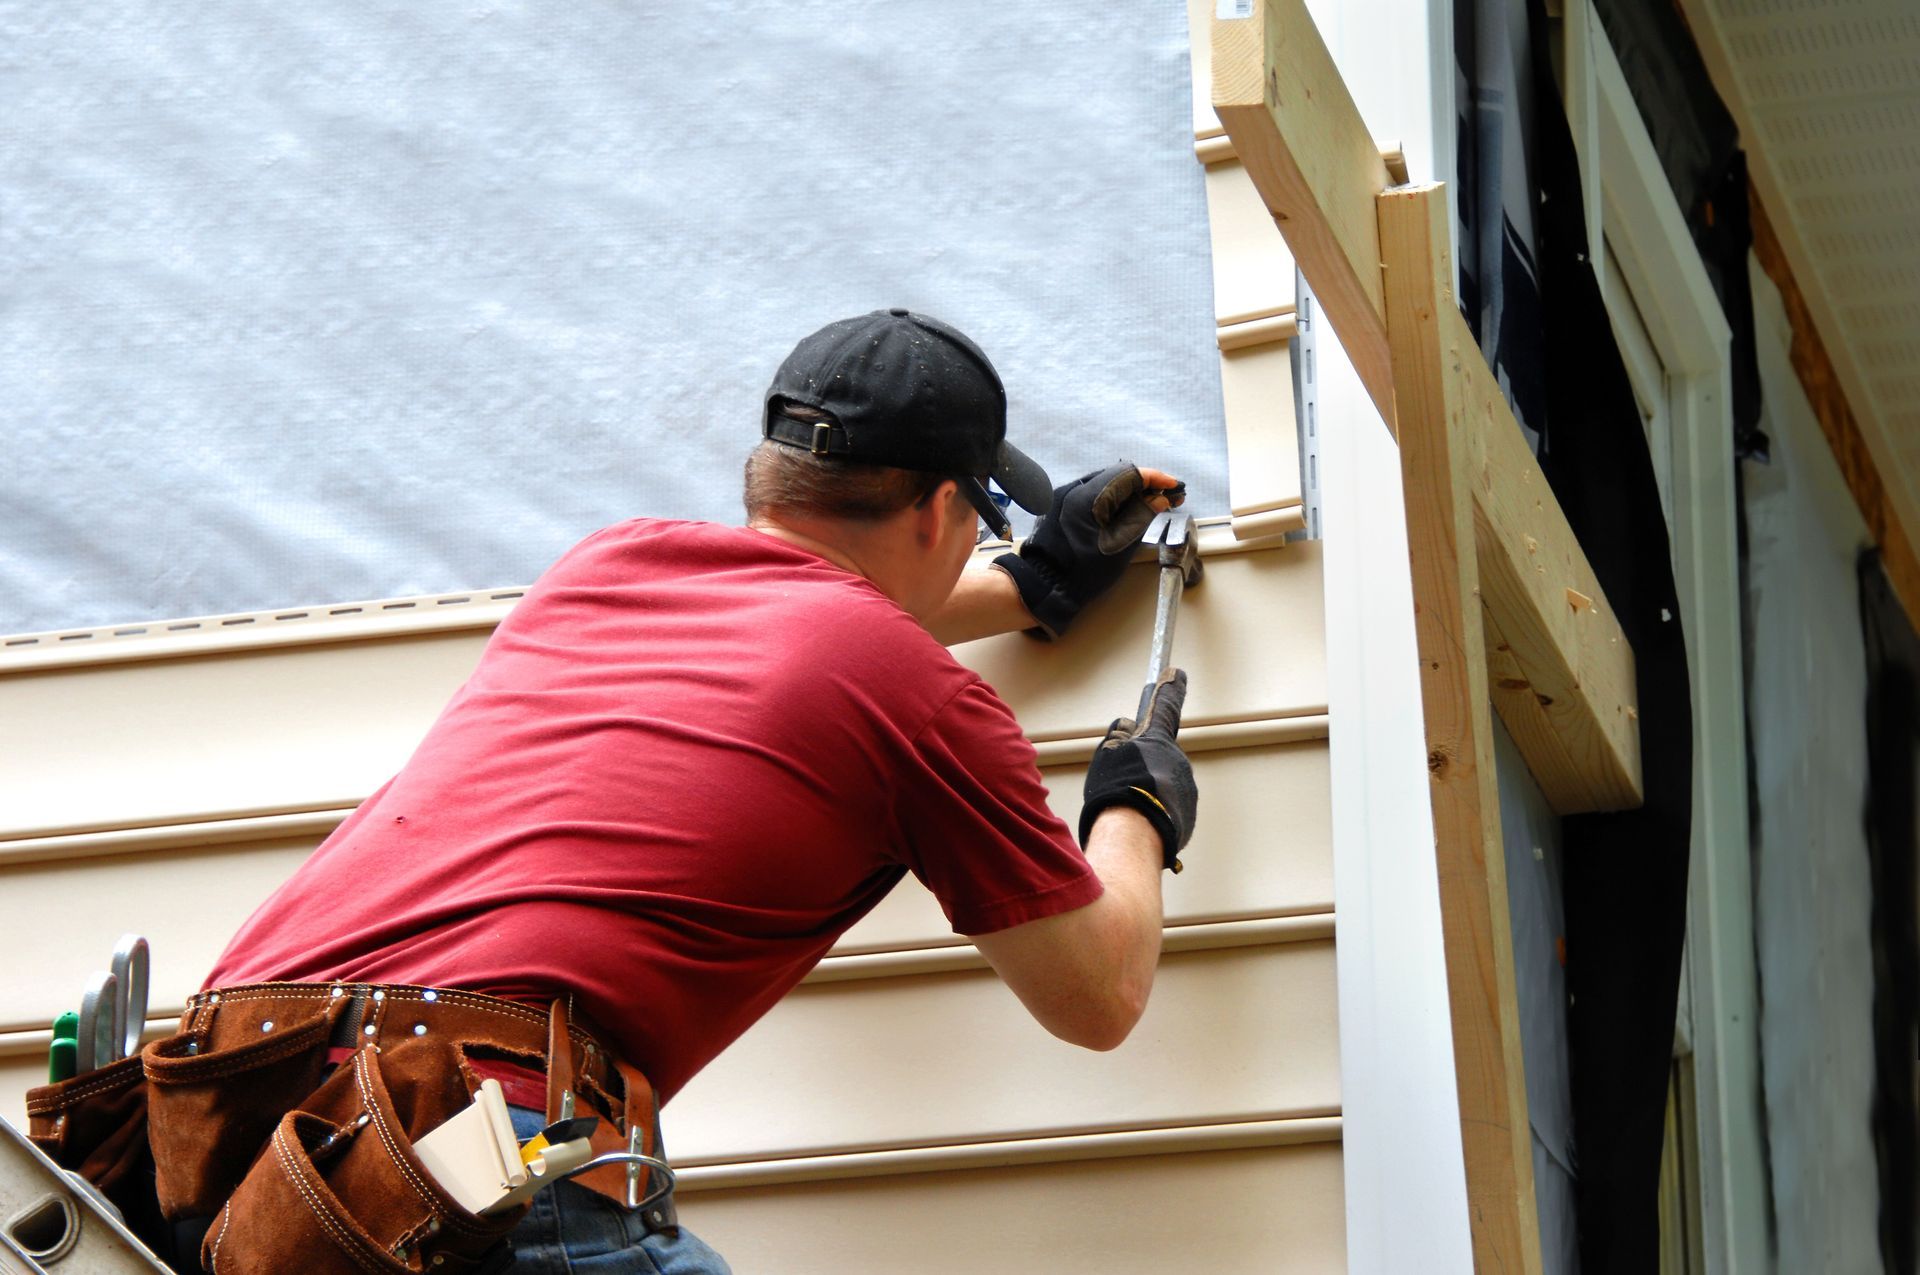 A worker wearing gloves is installing siding on the exterior of a house.